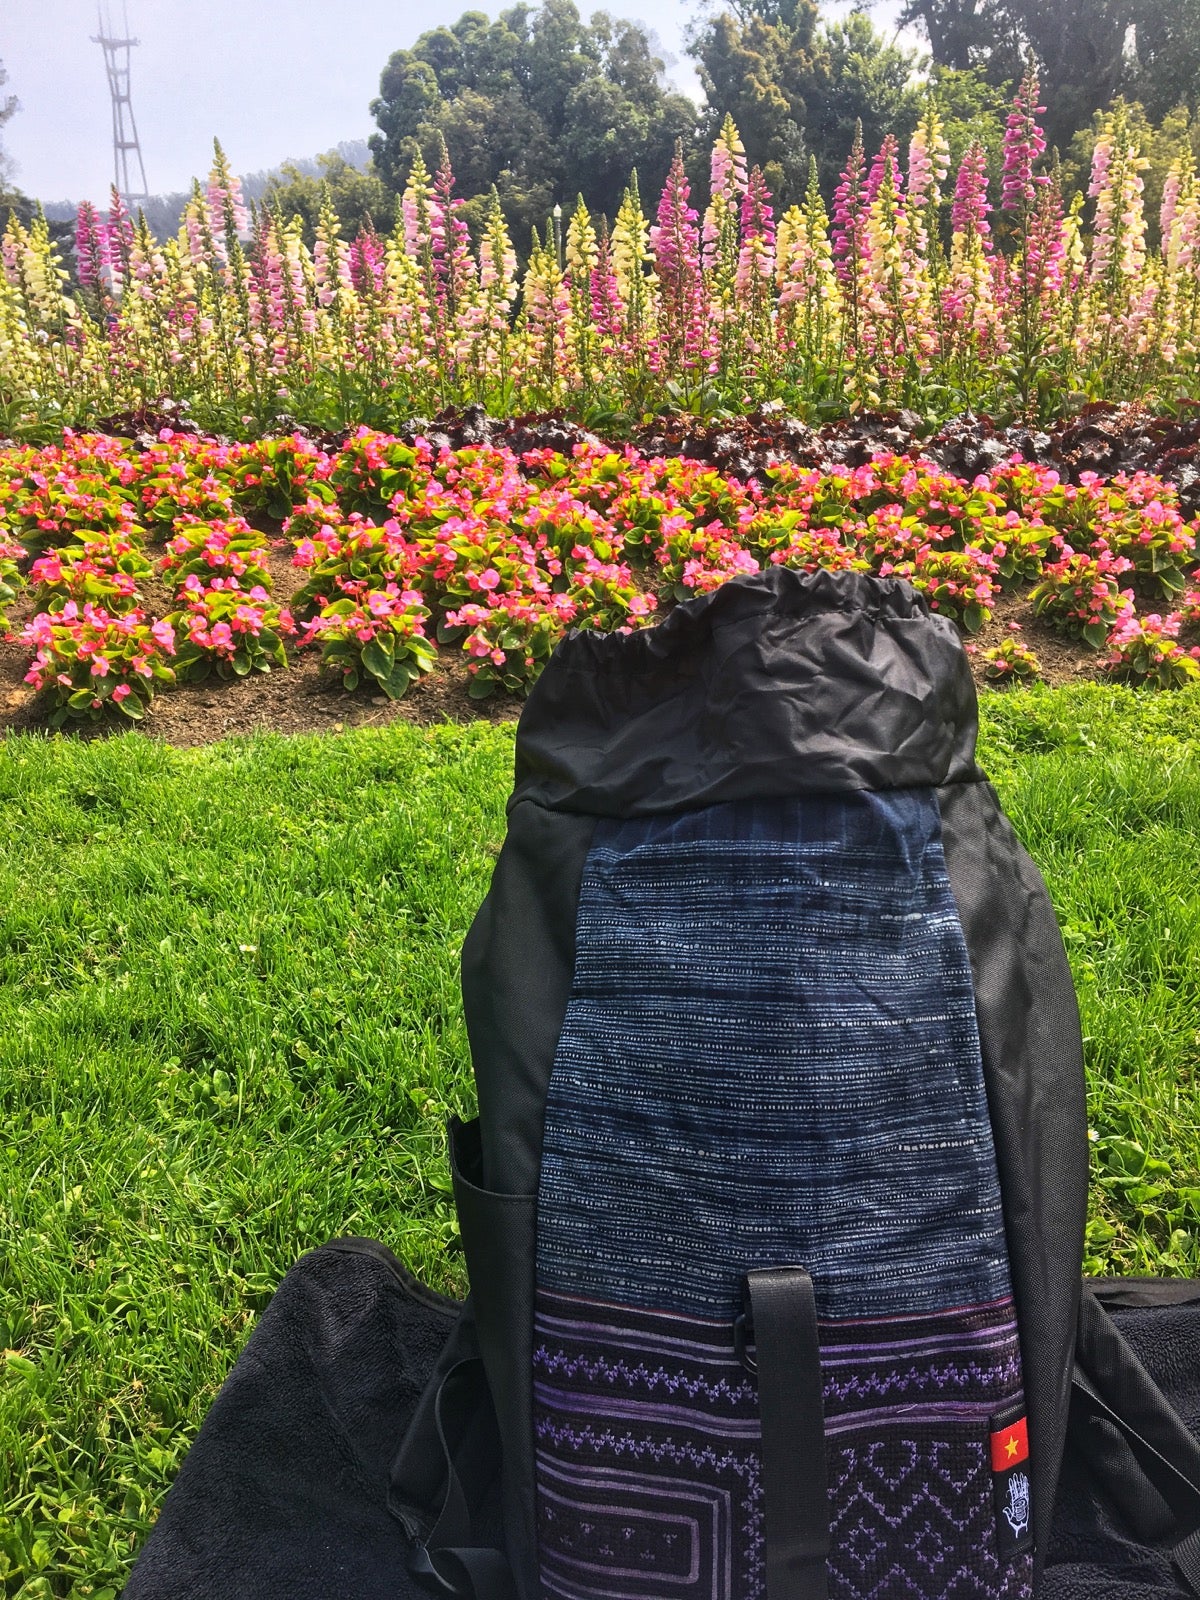 Took the Ethnotek Setia 20 Liter for a picnic in the park. Not just a camping day-pack.